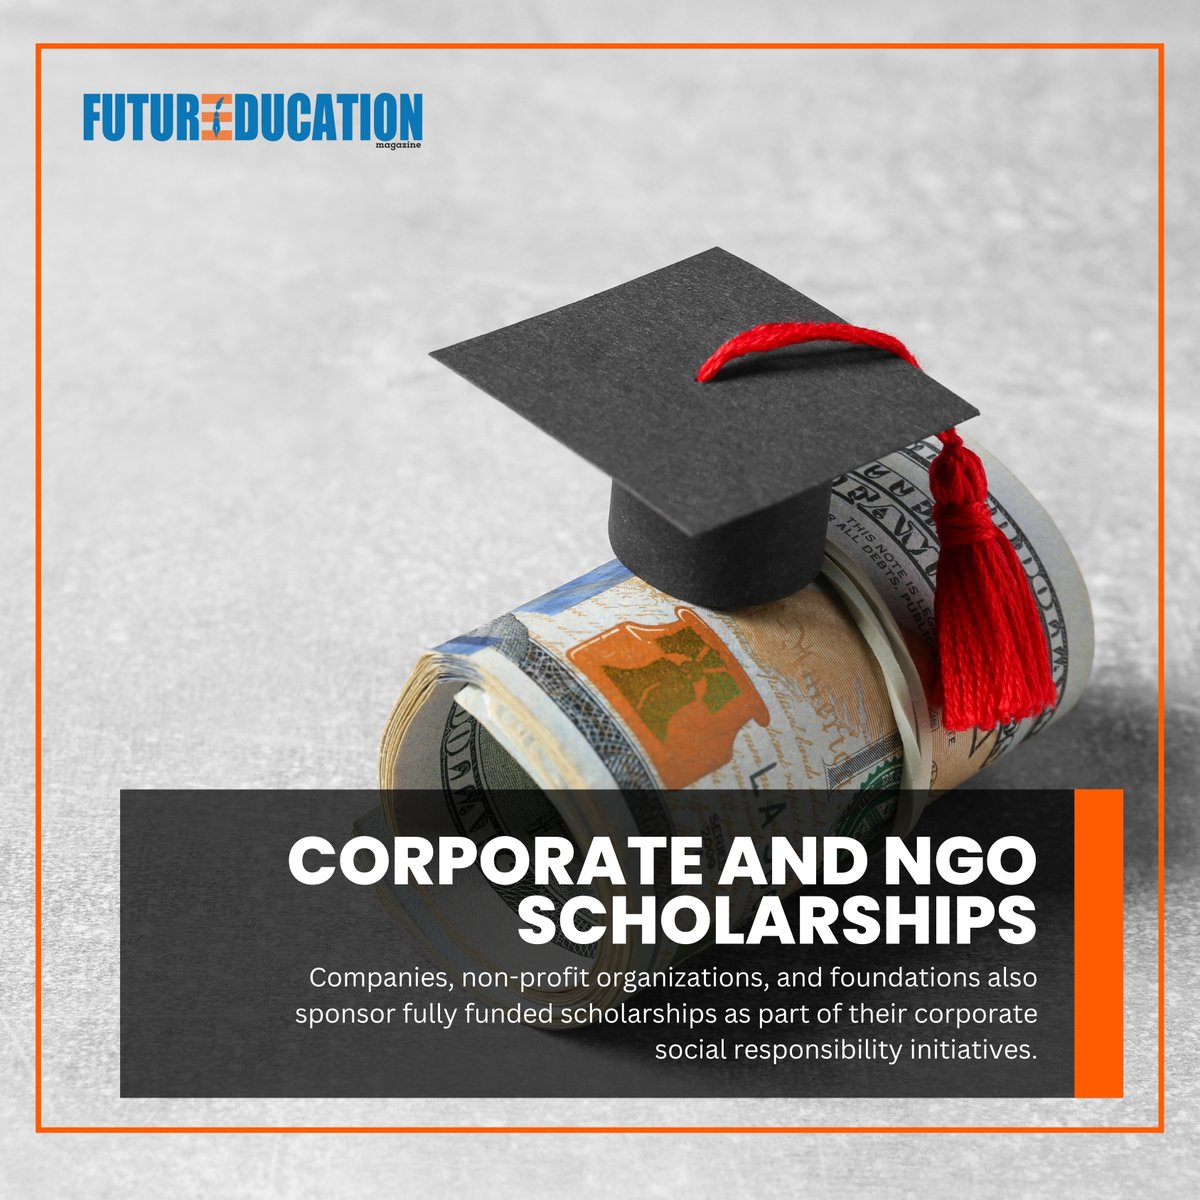 The Impact and Availability of Fully Funded Scholarships
Fully funded scholarships represent a gateway to educational opportunities that transcend financial barriers. In recent years, the availability 
Read More: futureeducationmagazine.com/fully-funded-s…
#ScholarshipOpportunities #EducationForAll